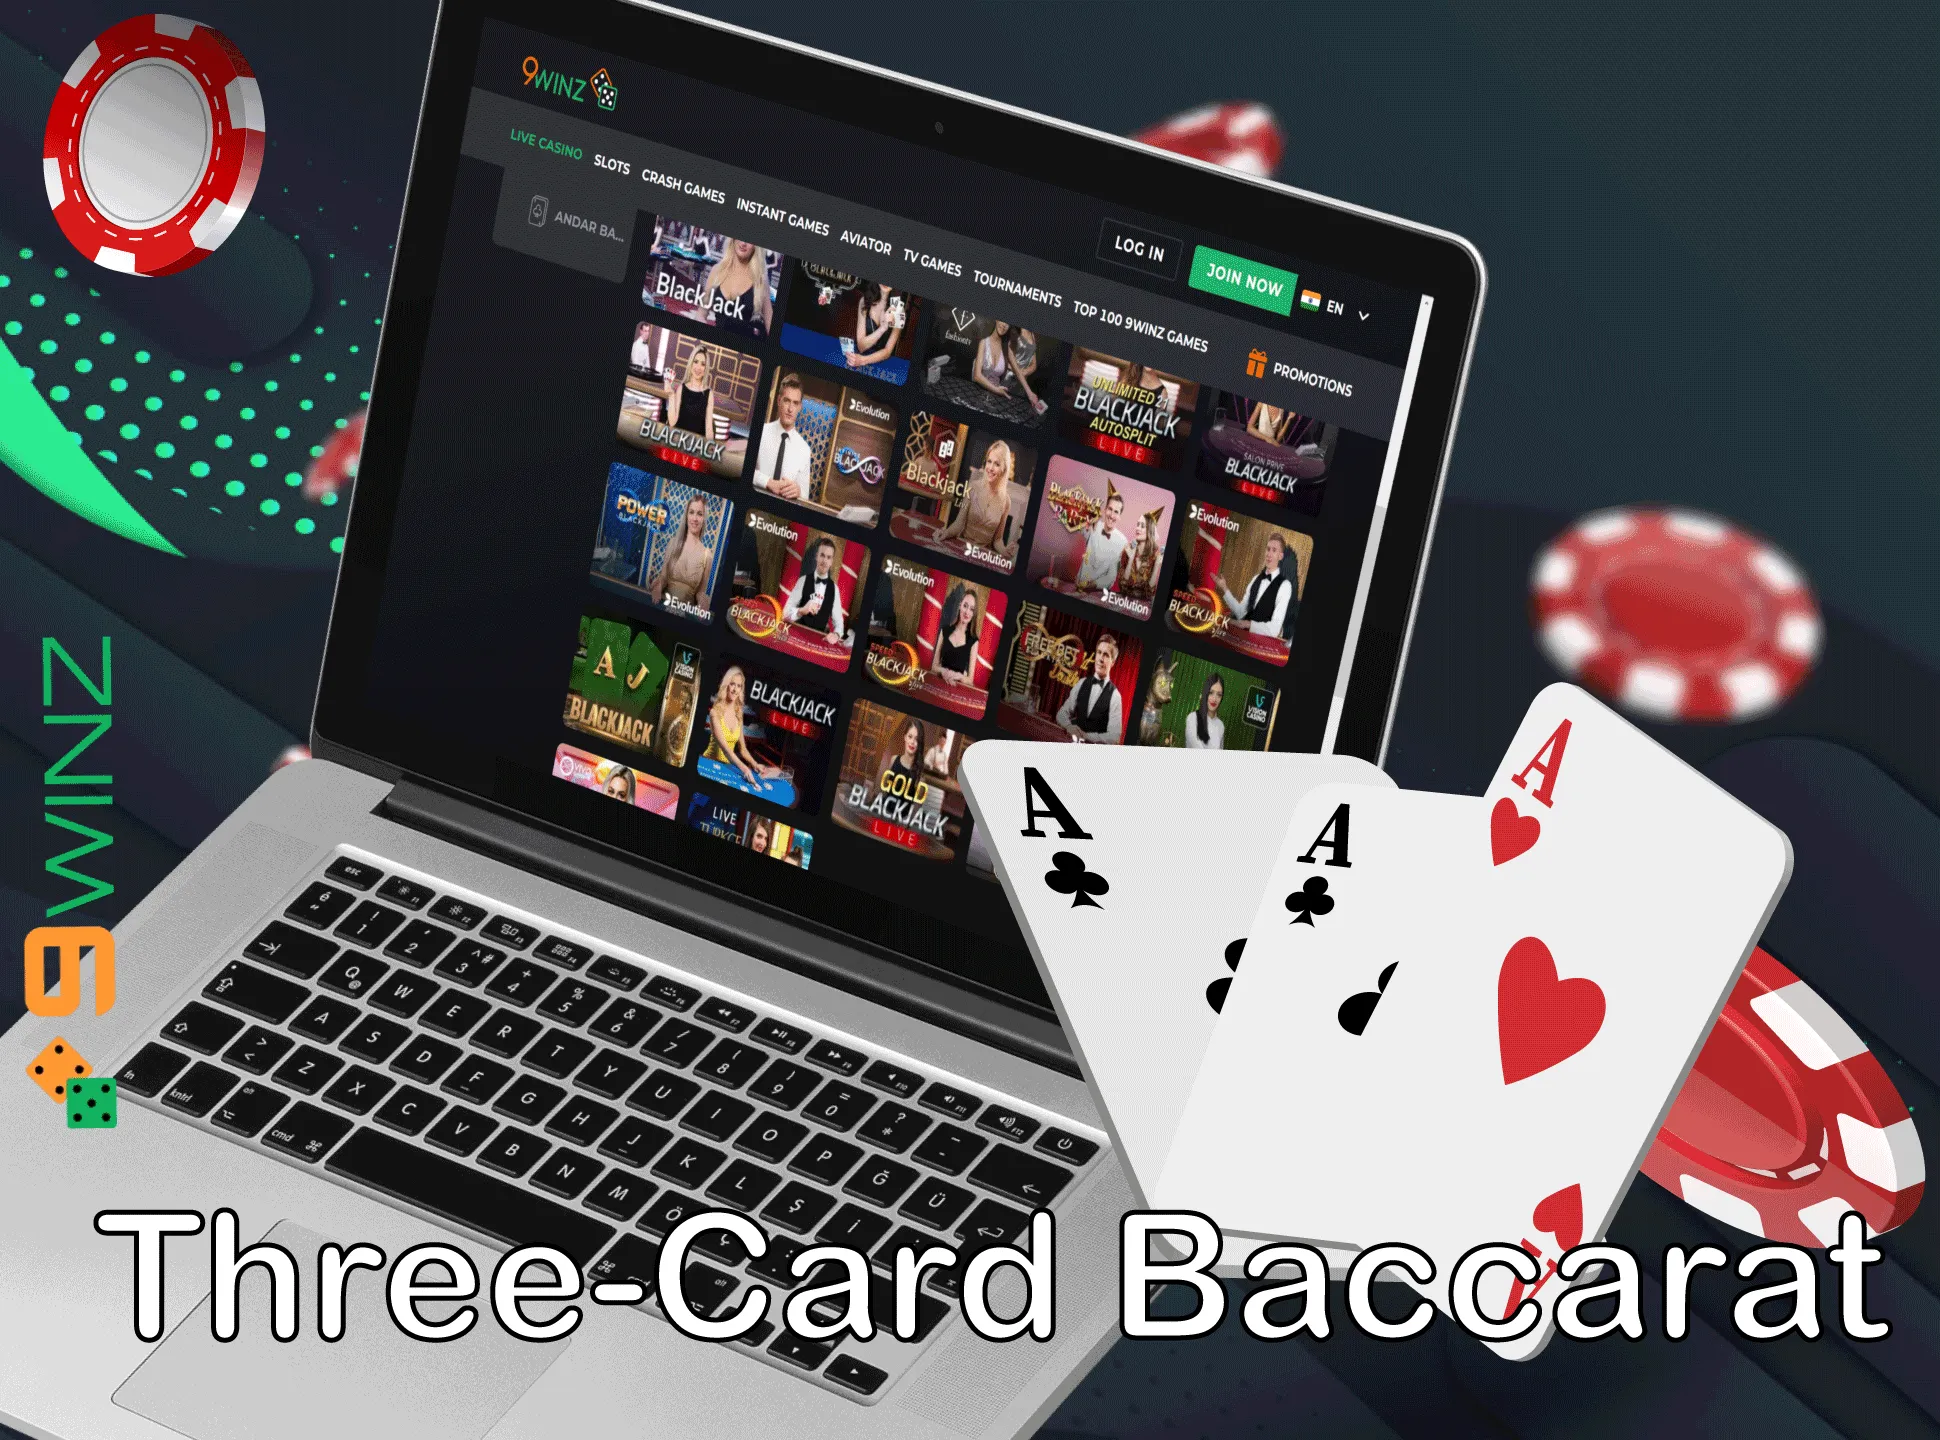 Play exotic three card version of baccarat at the 9winz casino.